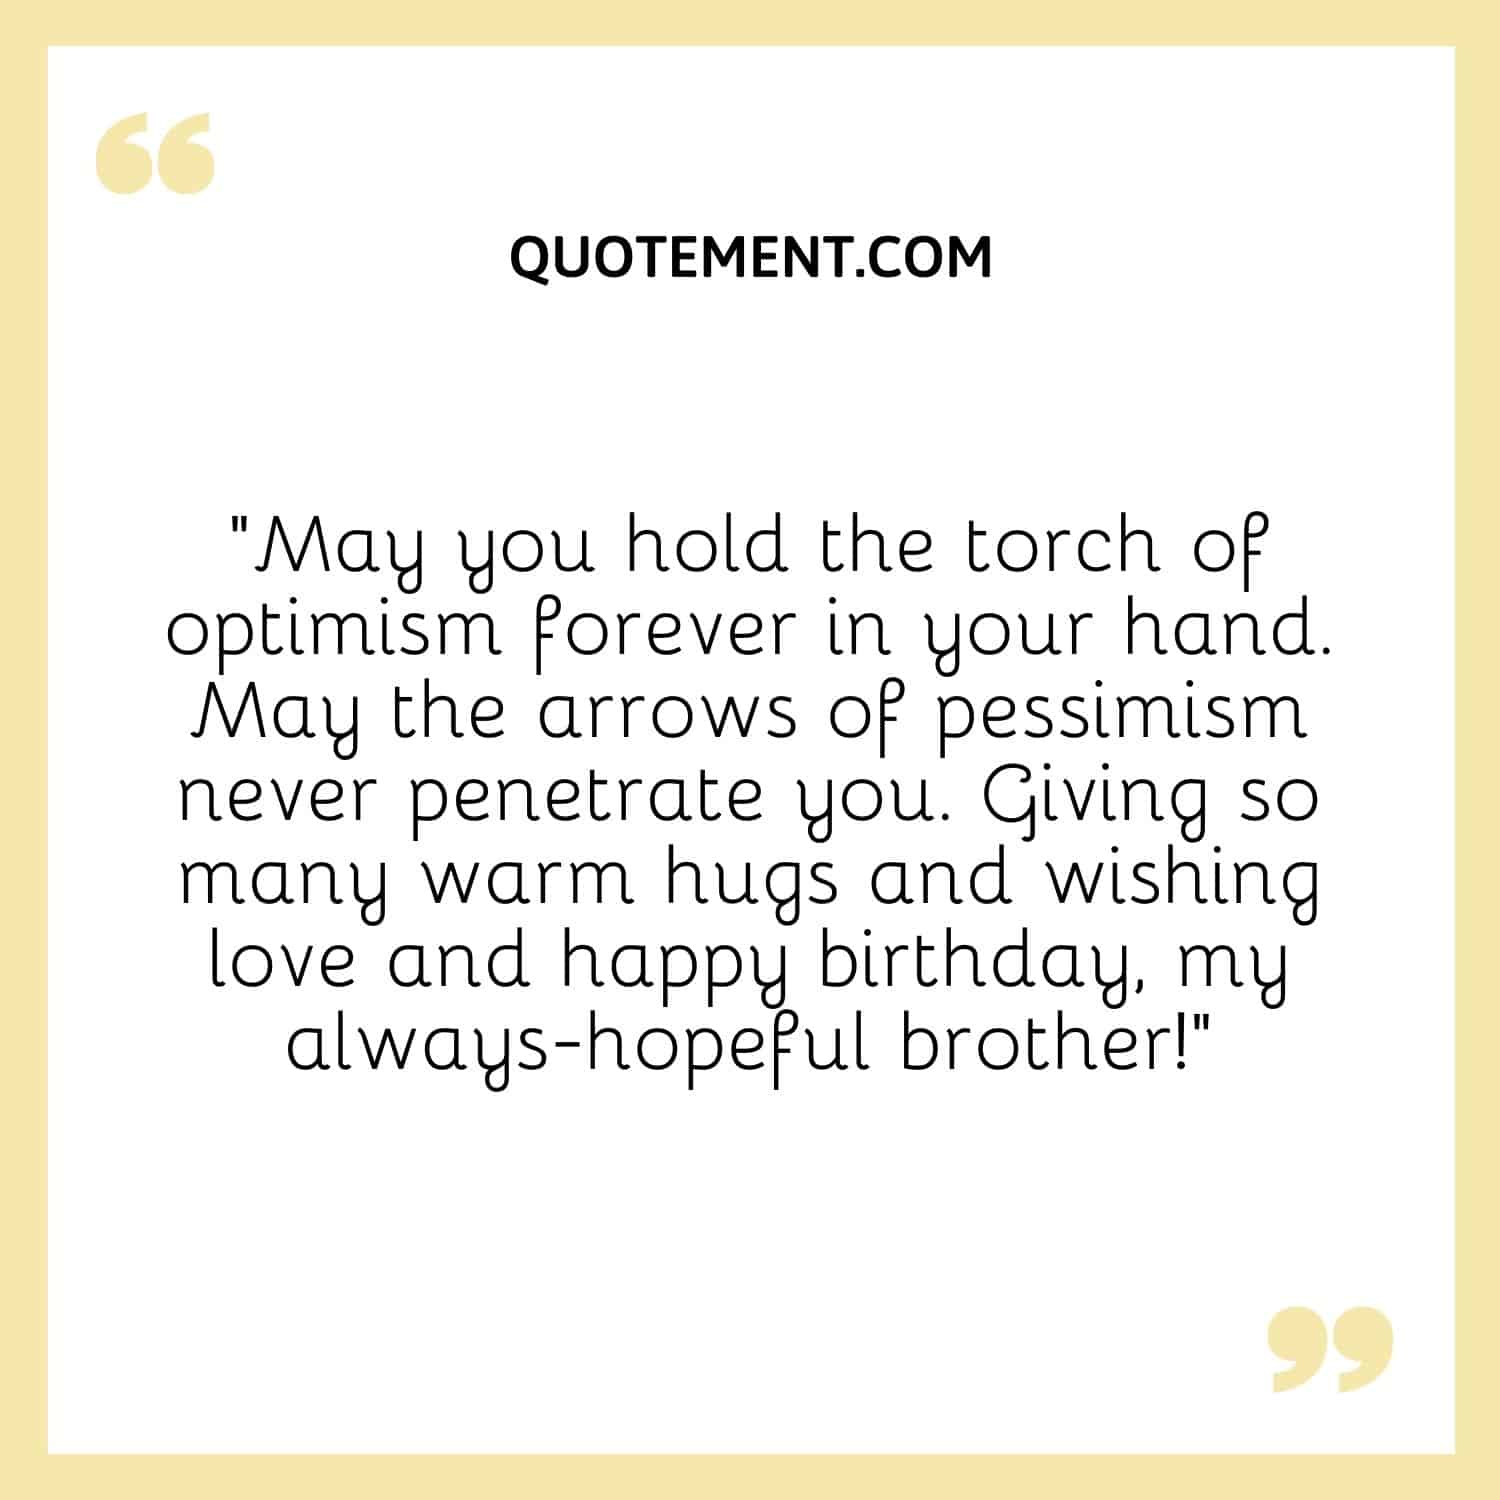 May you hold the torch of optimism forever in your hand.